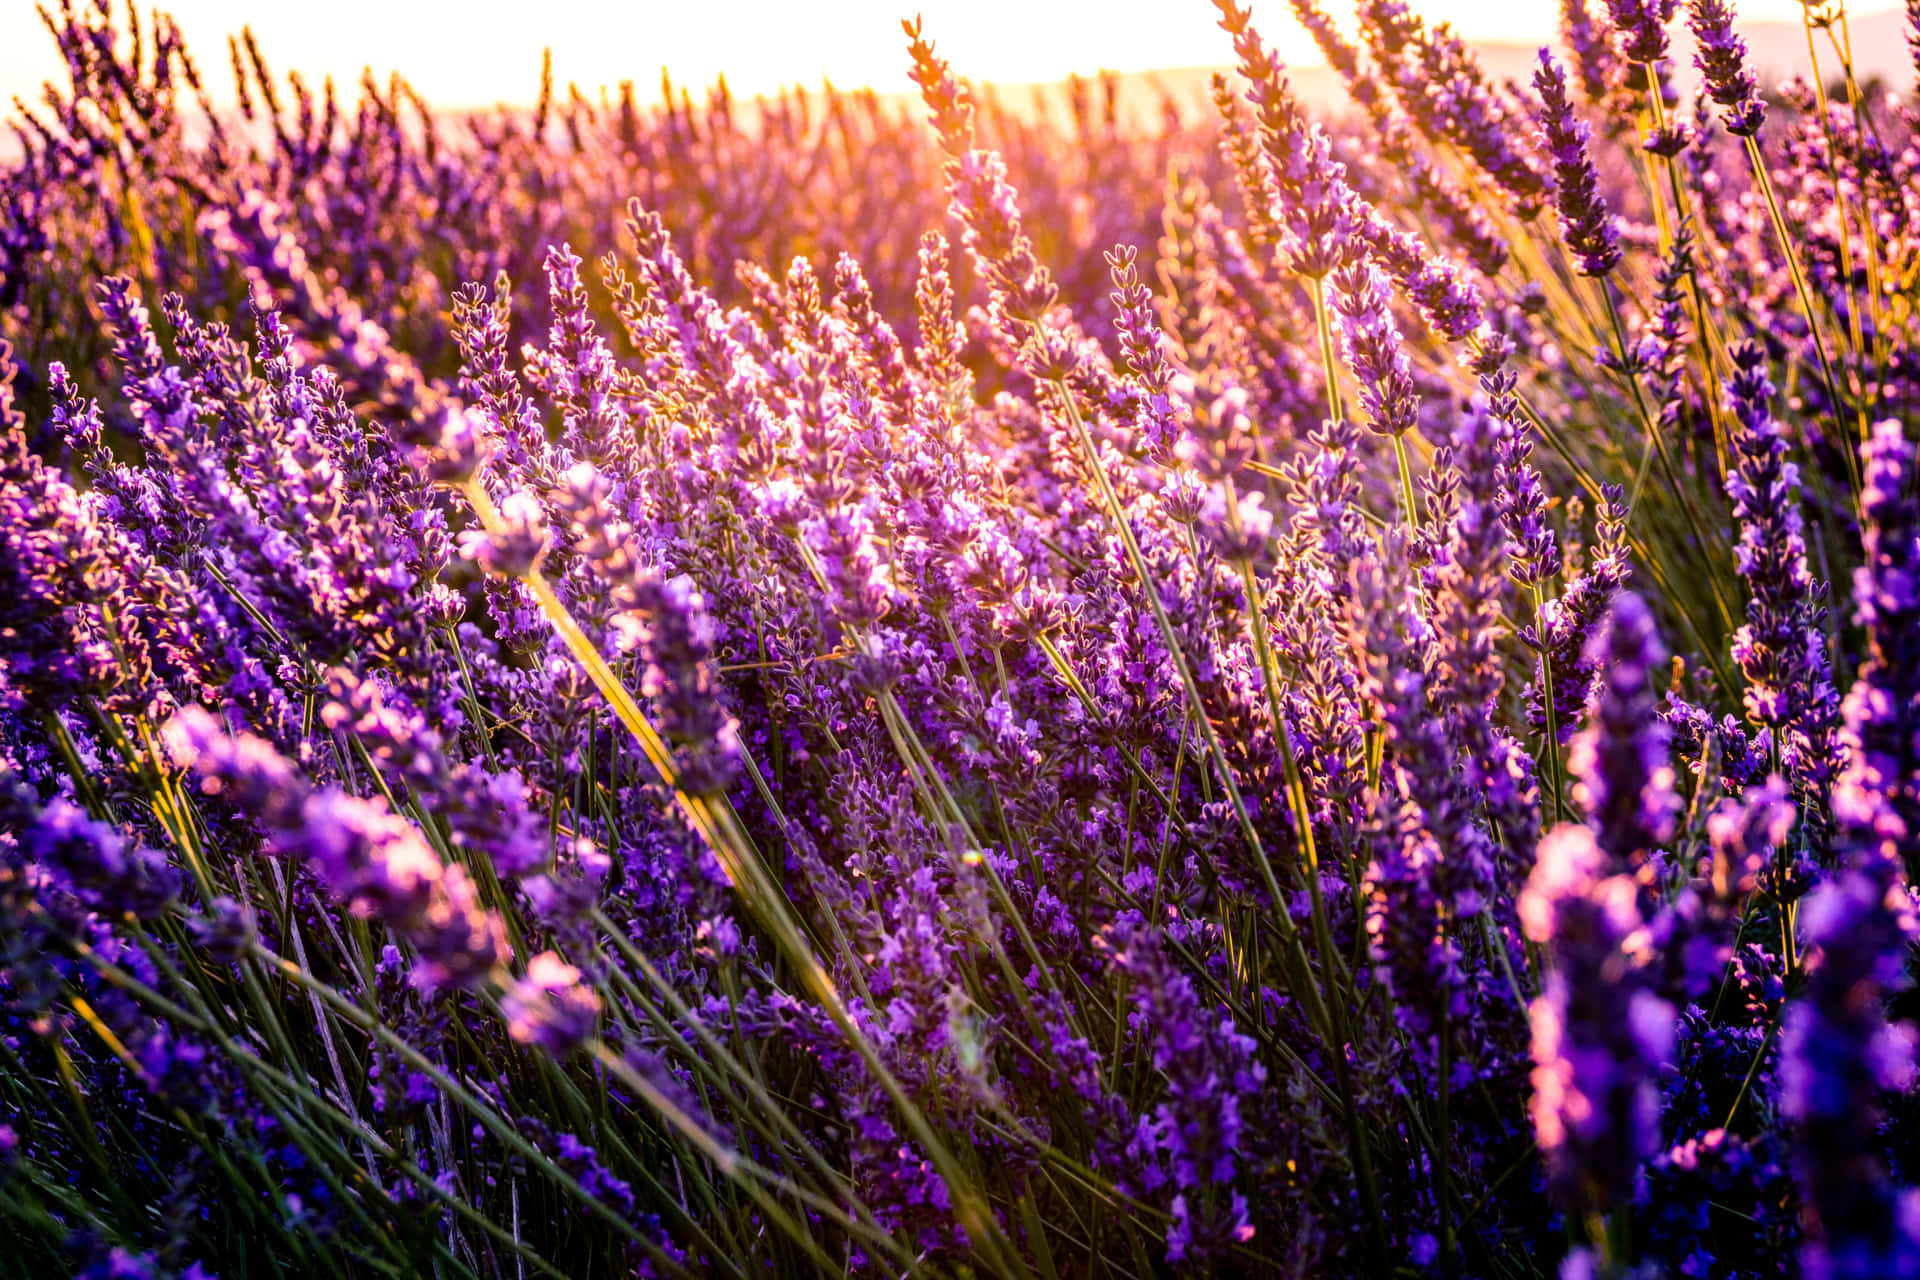 Brilliant Lavender Flowers And Grass Field Wallpaper